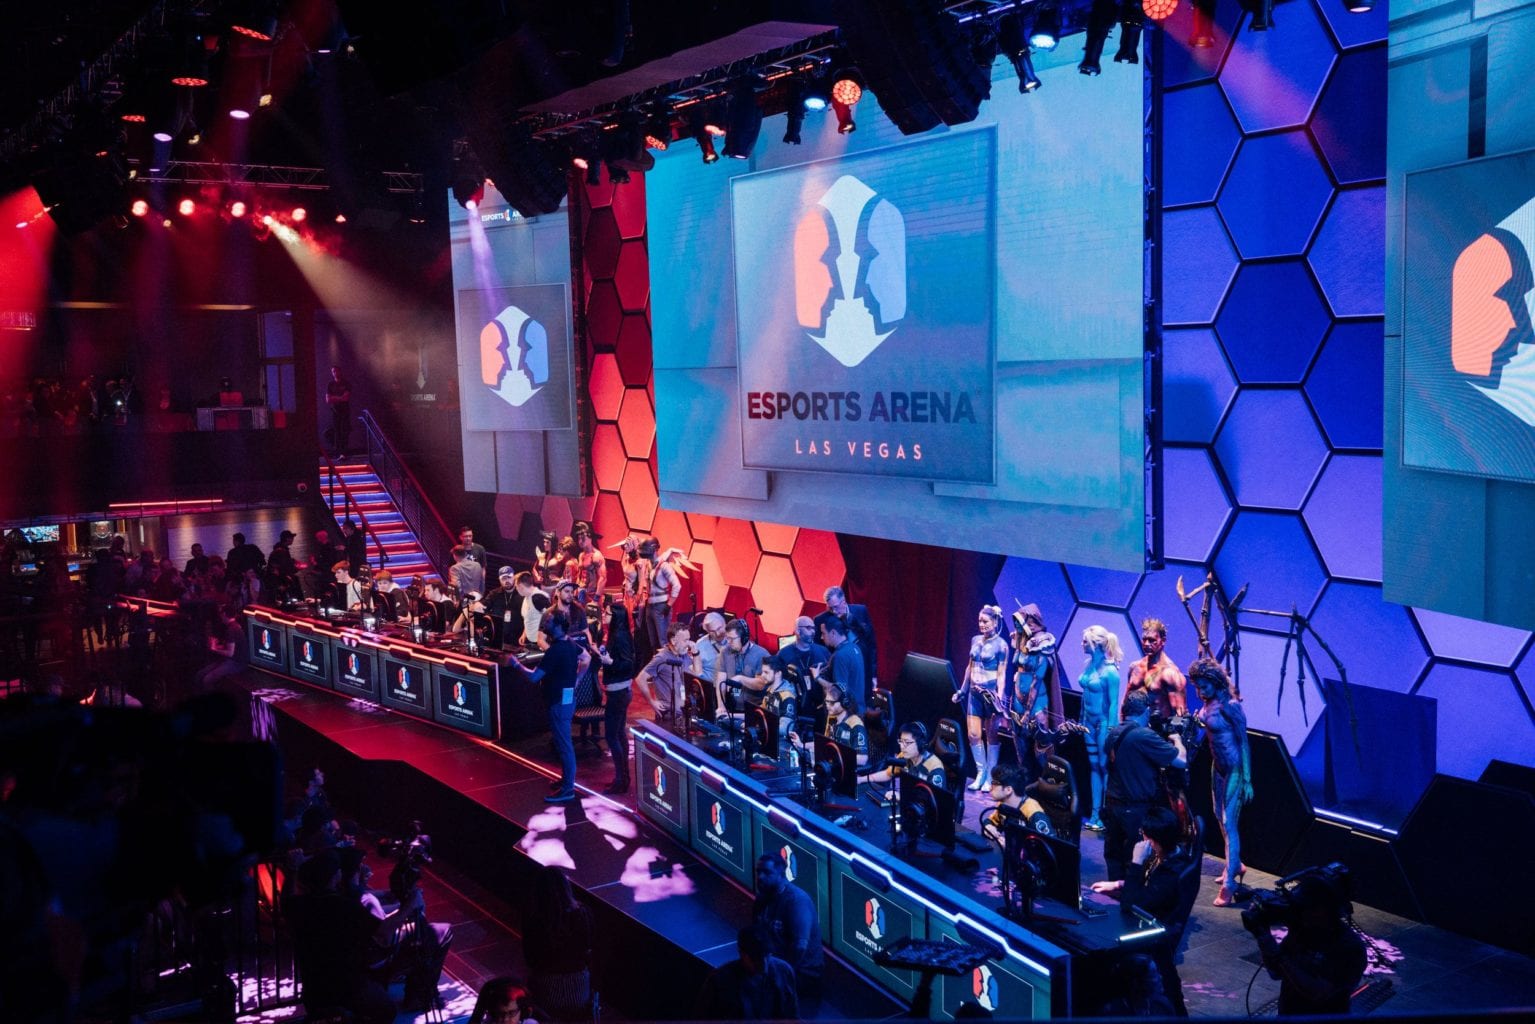 The 2018 League of Legends All-Star Event will be held at the Esports Arena Las Vegas